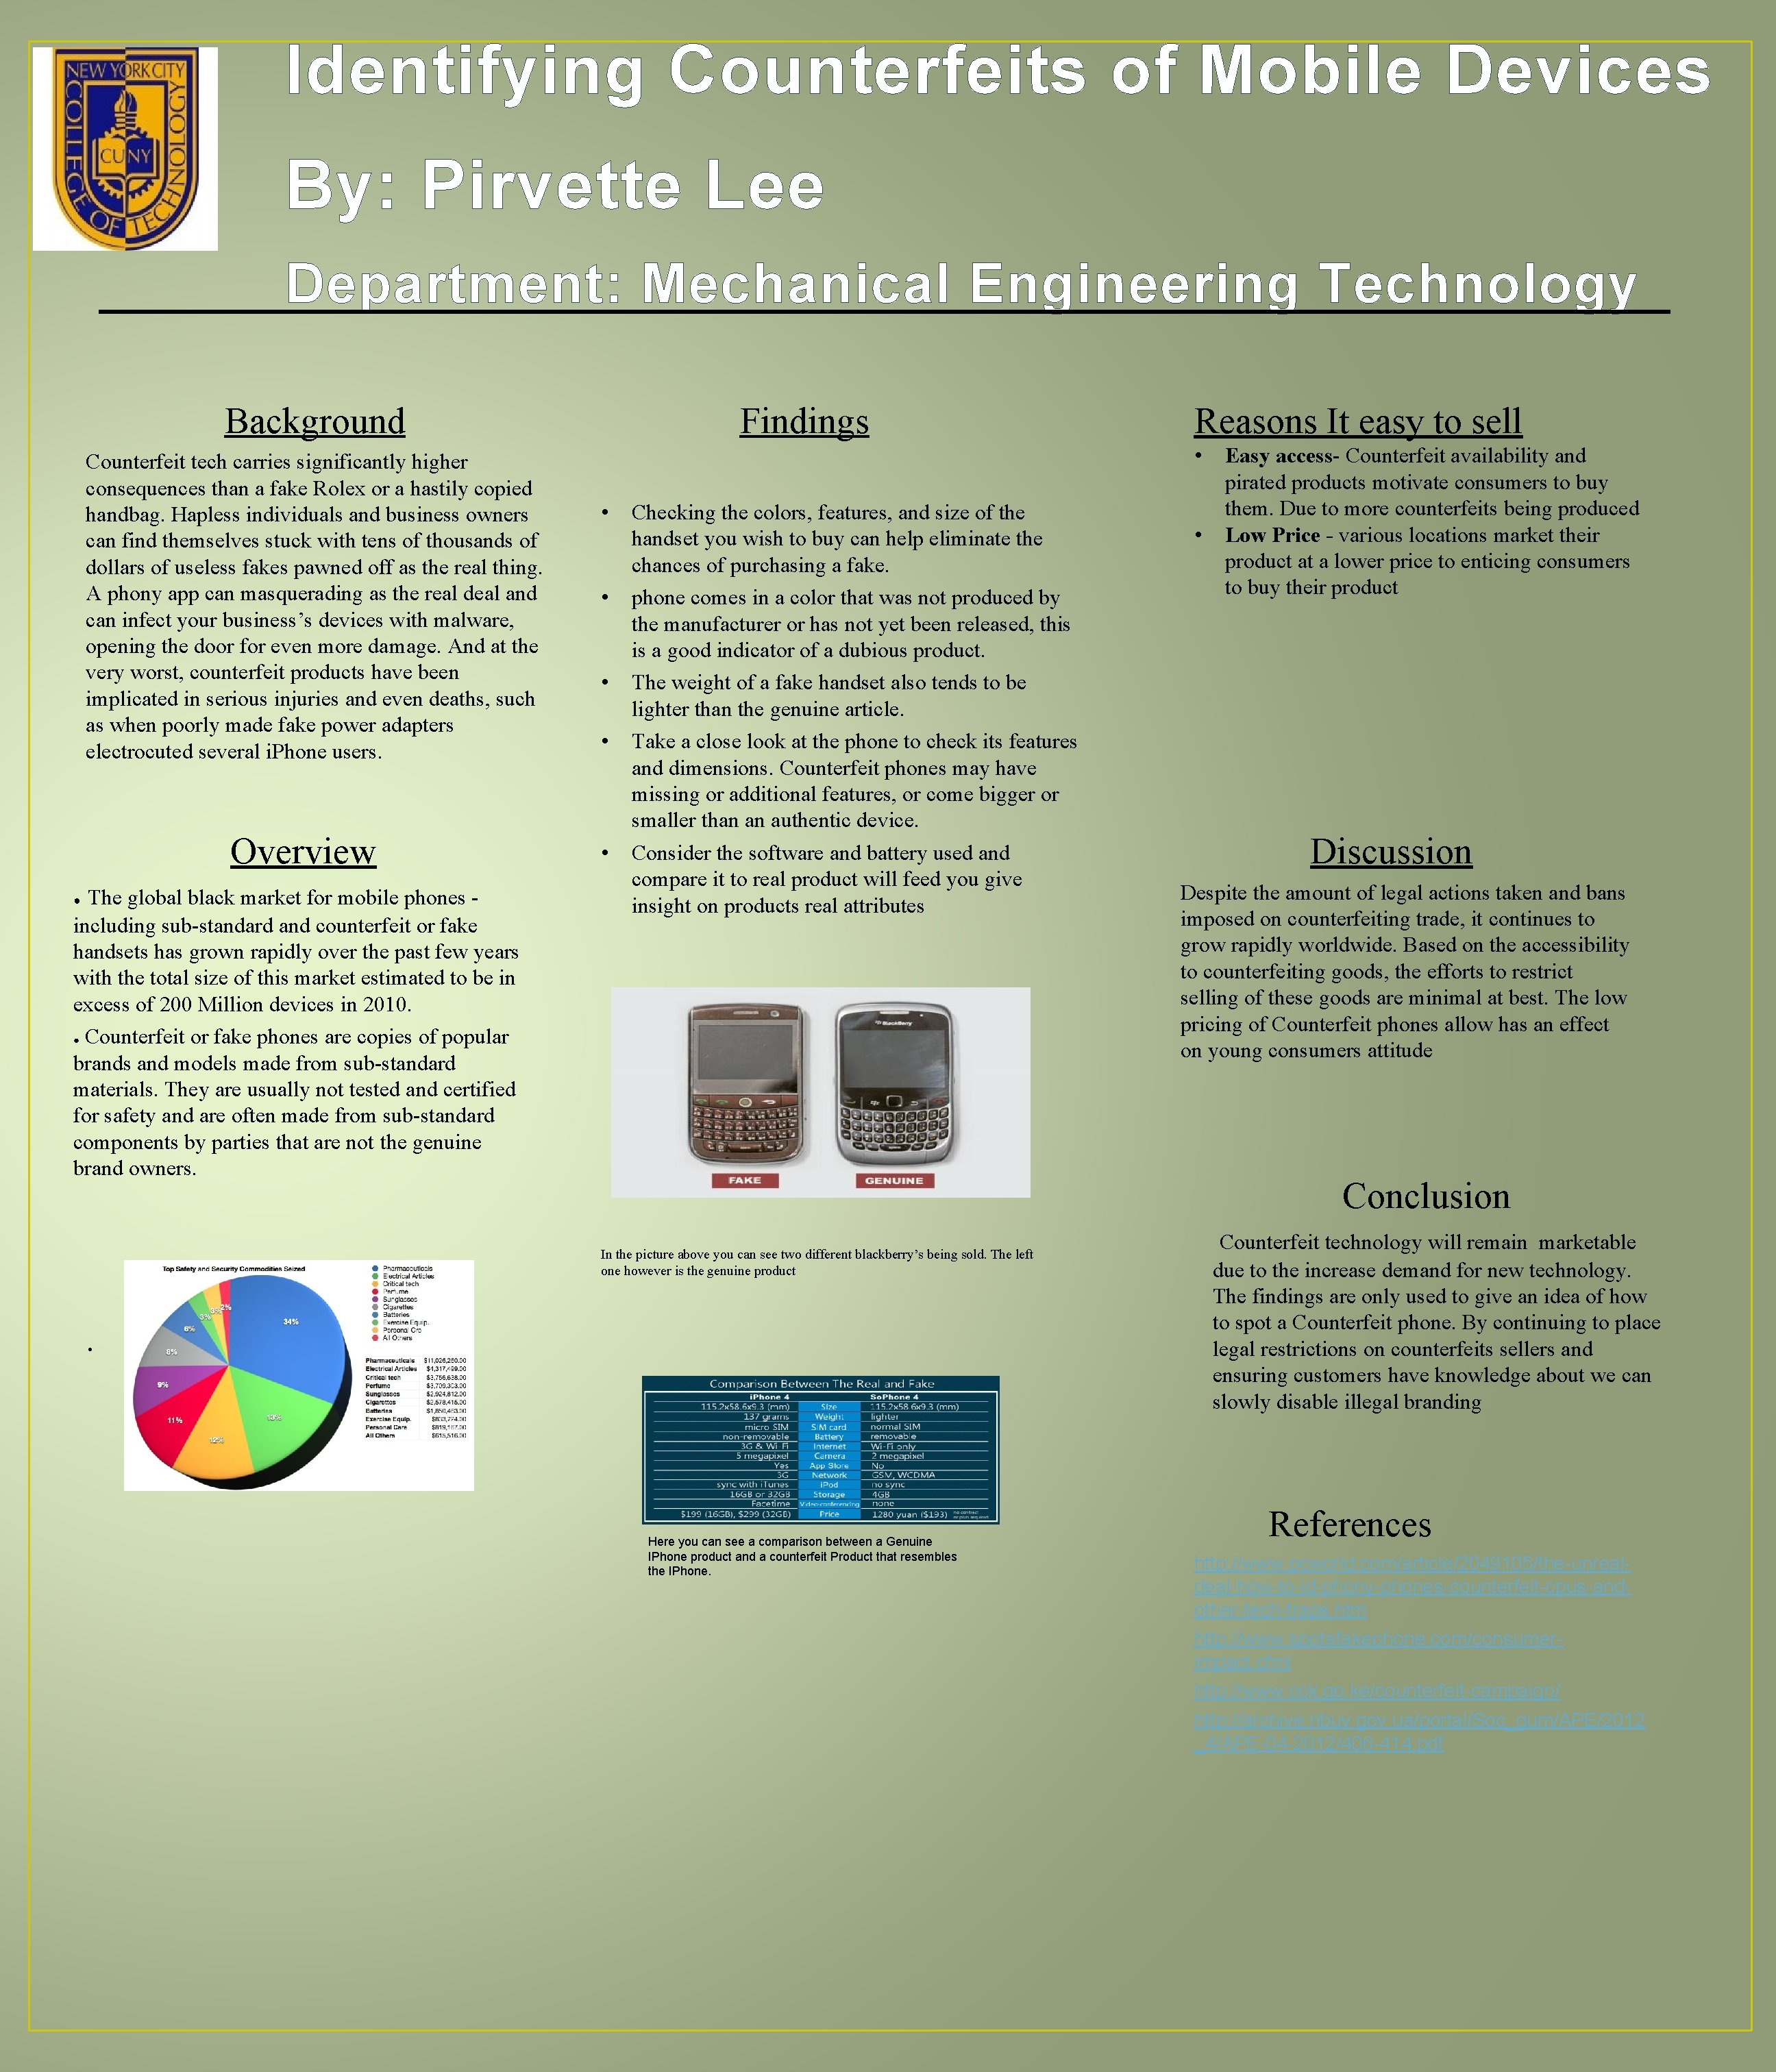 Identifying Counterfeits of Mobile Devices By: Pirvette Lee Department: Mechanical Engineering Technology Background Counterfeit